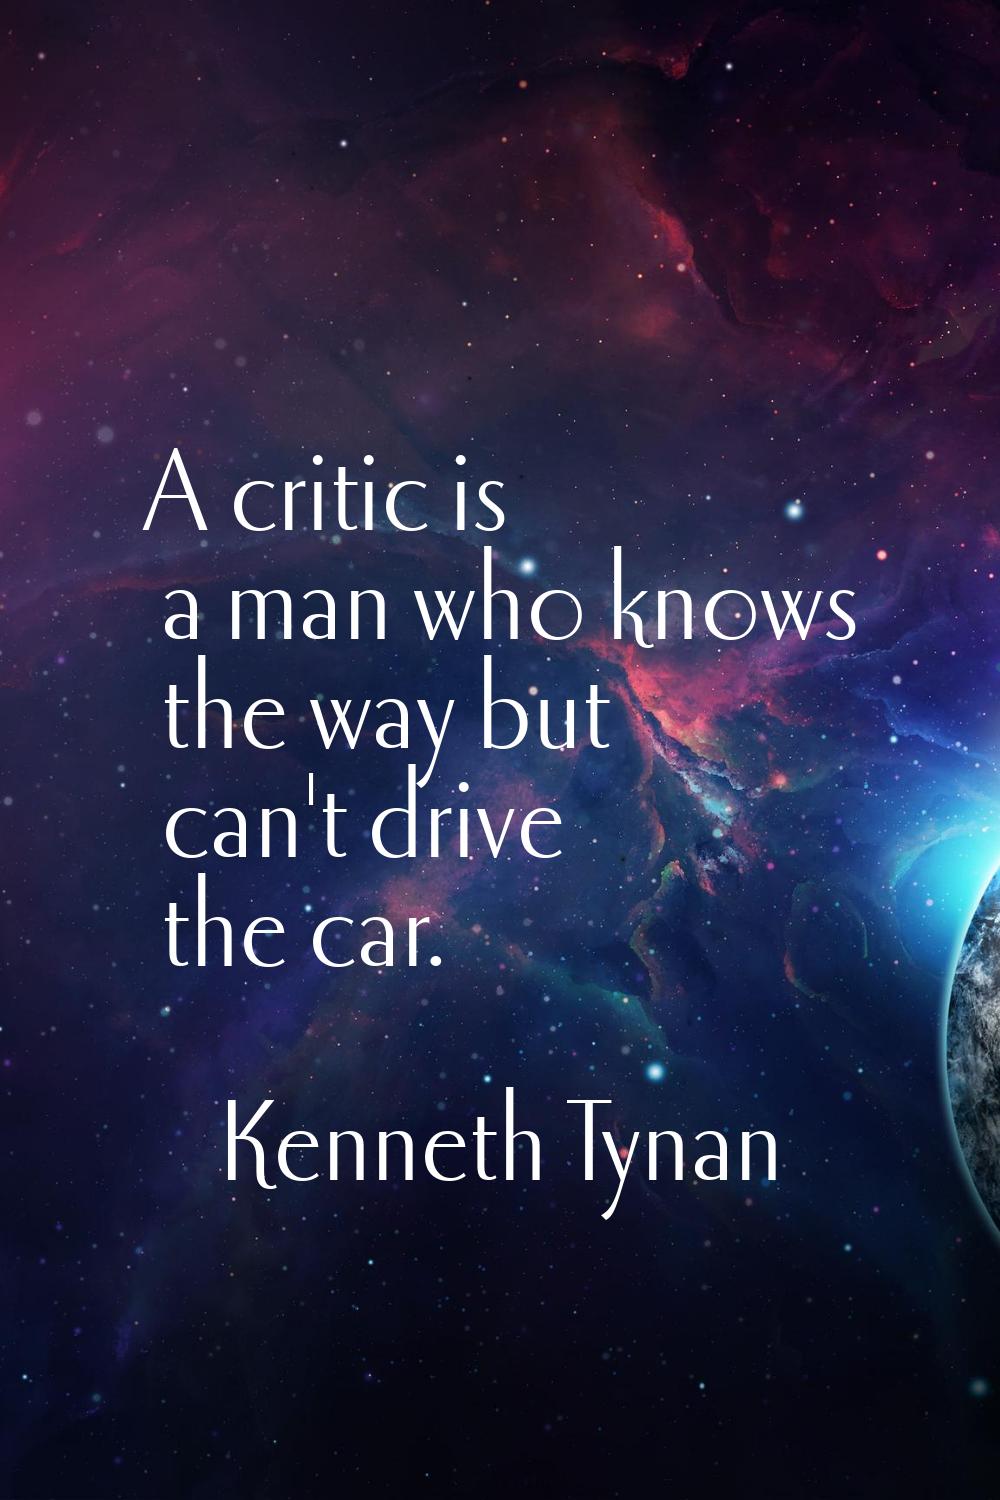 A critic is a man who knows the way but can't drive the car.